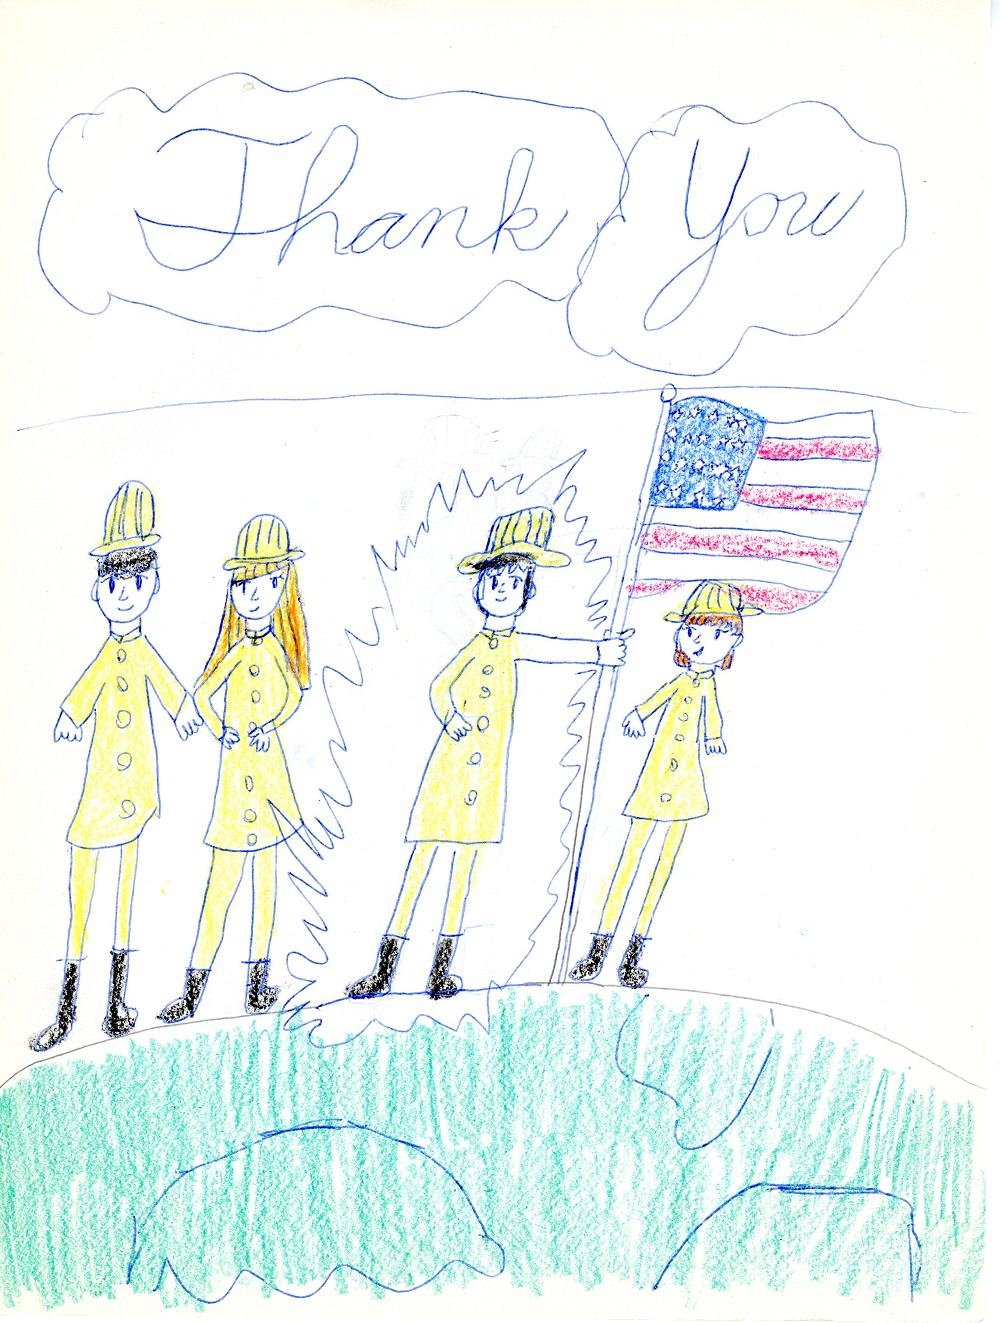  child’s drawing depicts four firefighters dressed in yellow. One of them is holding a large American flag. The words “thank you” are written above them.